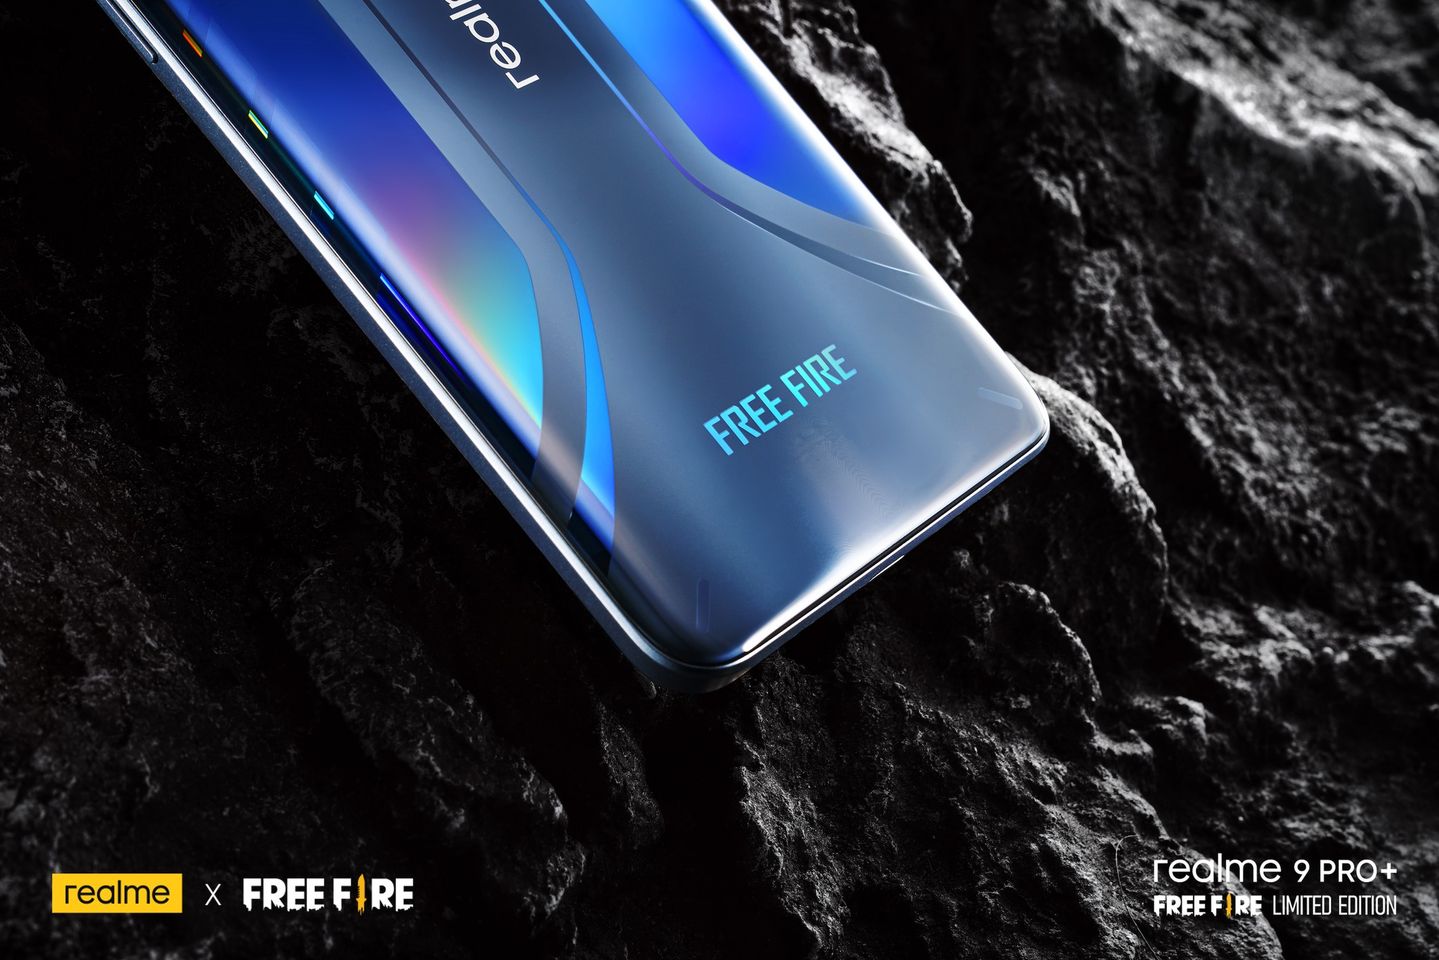 DirectD Retail & Wholesale Sdn. Bhd. - Online Store. realme 9 Pro Plus -  FREE FIRE LIMITED EDITION [READY STOCK]